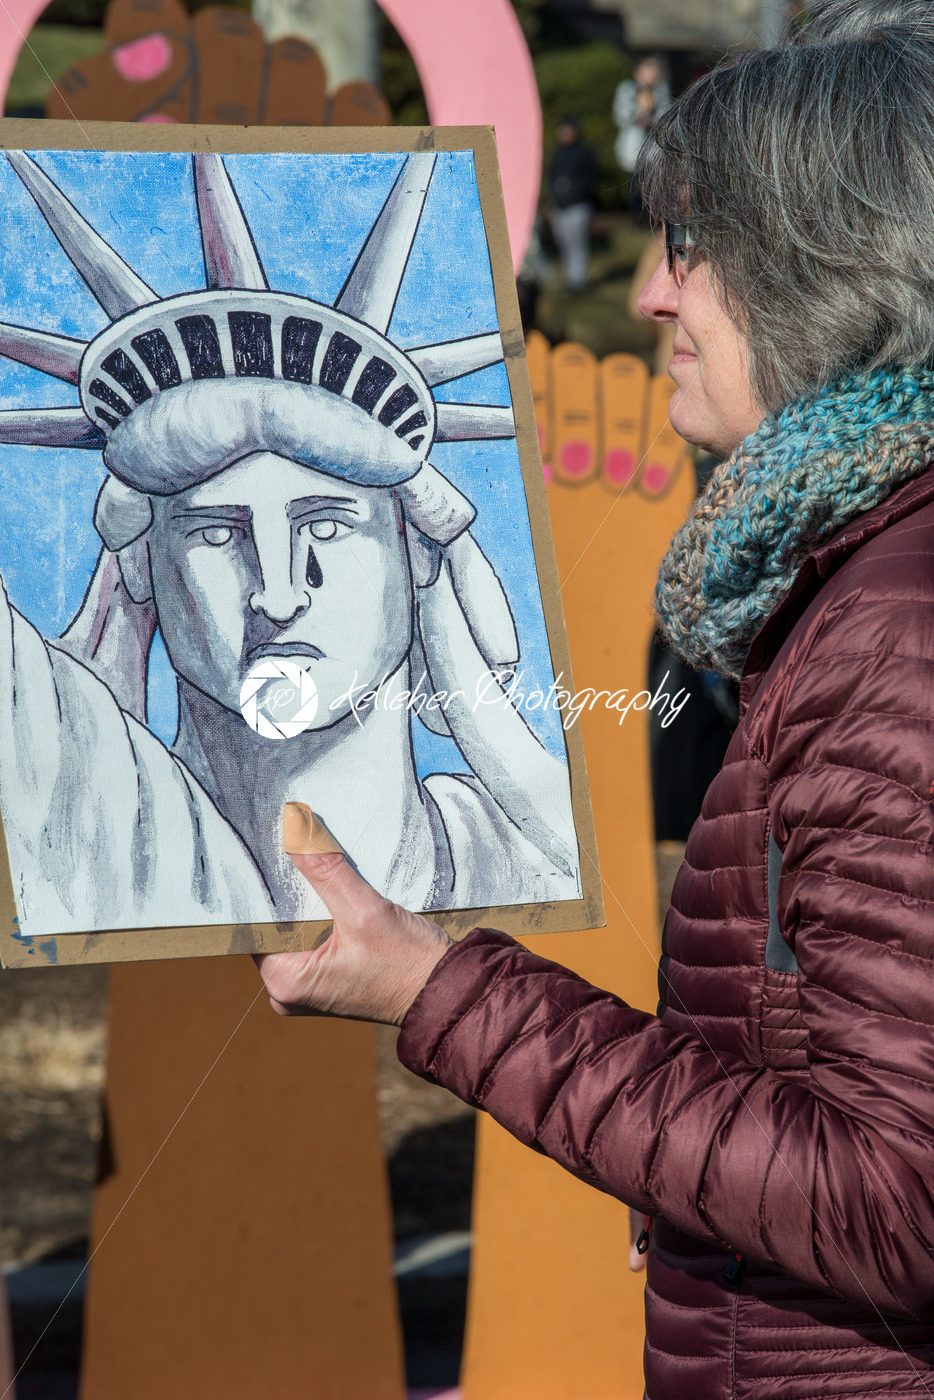 Philadelphia, Pennsylvania, USA – January 20, 2018: Thousands in Philadelphia unite in solidarity with the Women’s March. - Kelleher Photography Store